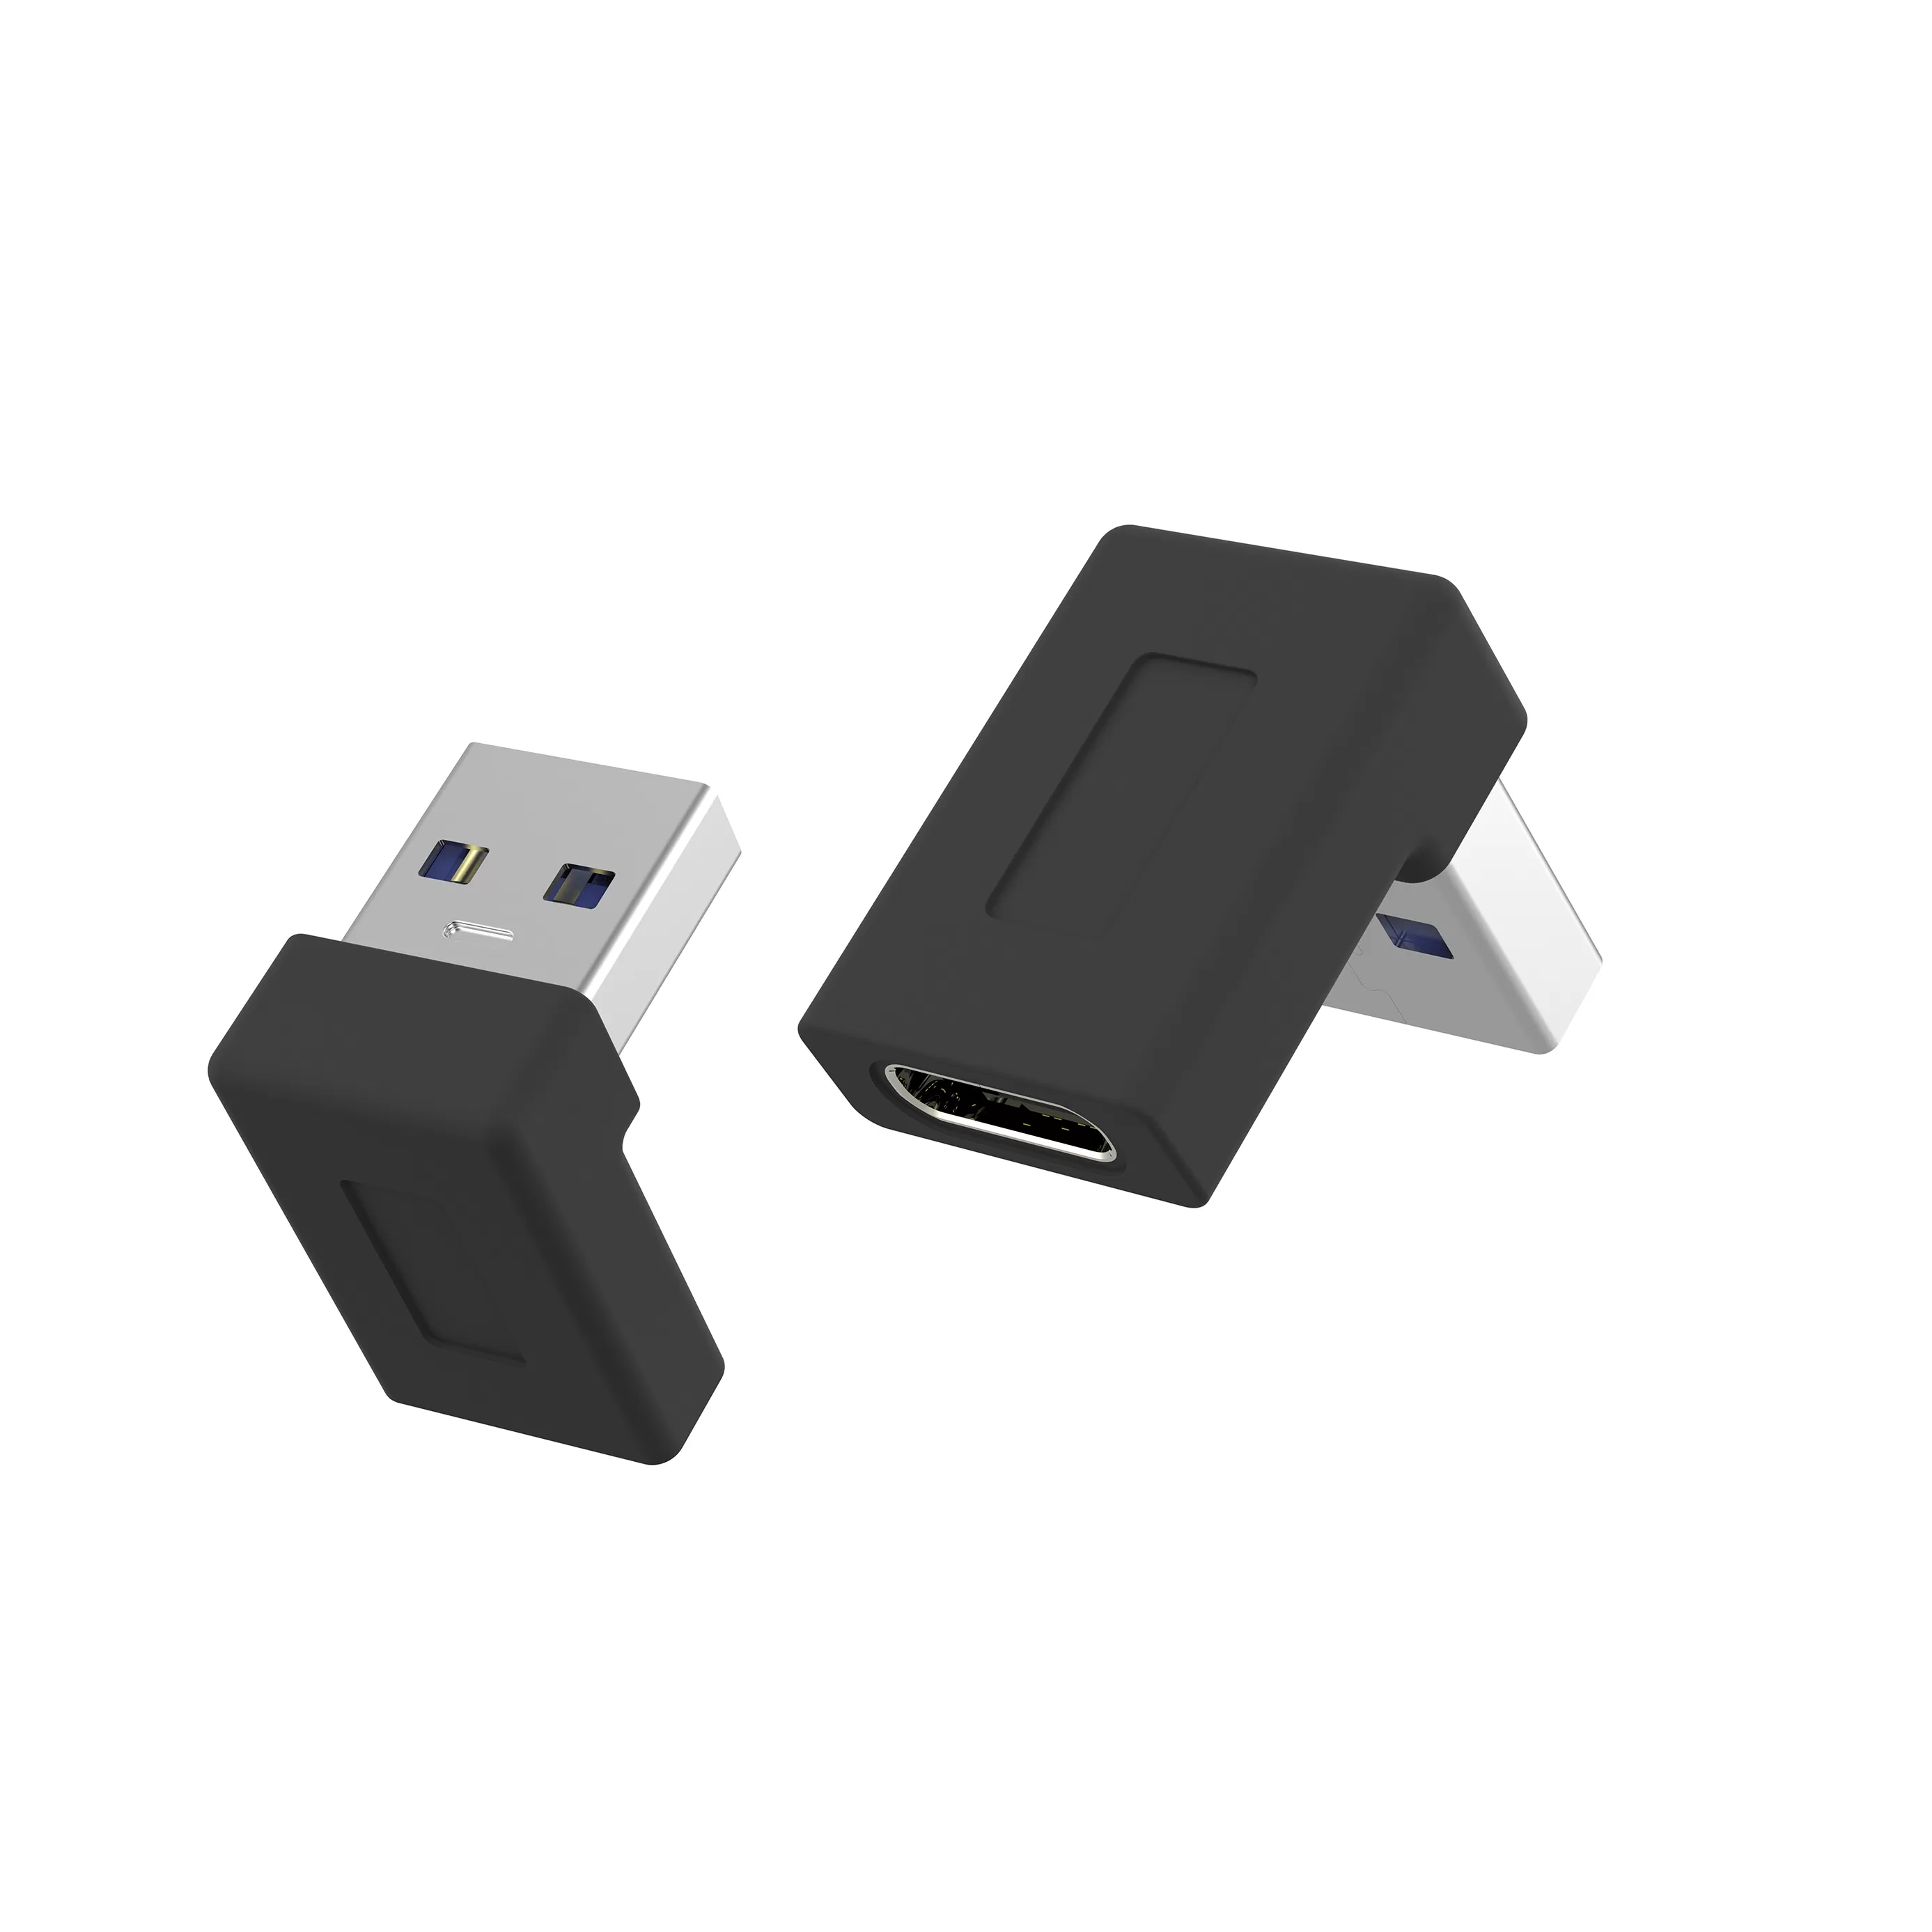 Right Angle USB A Male to USB C Female Adapter